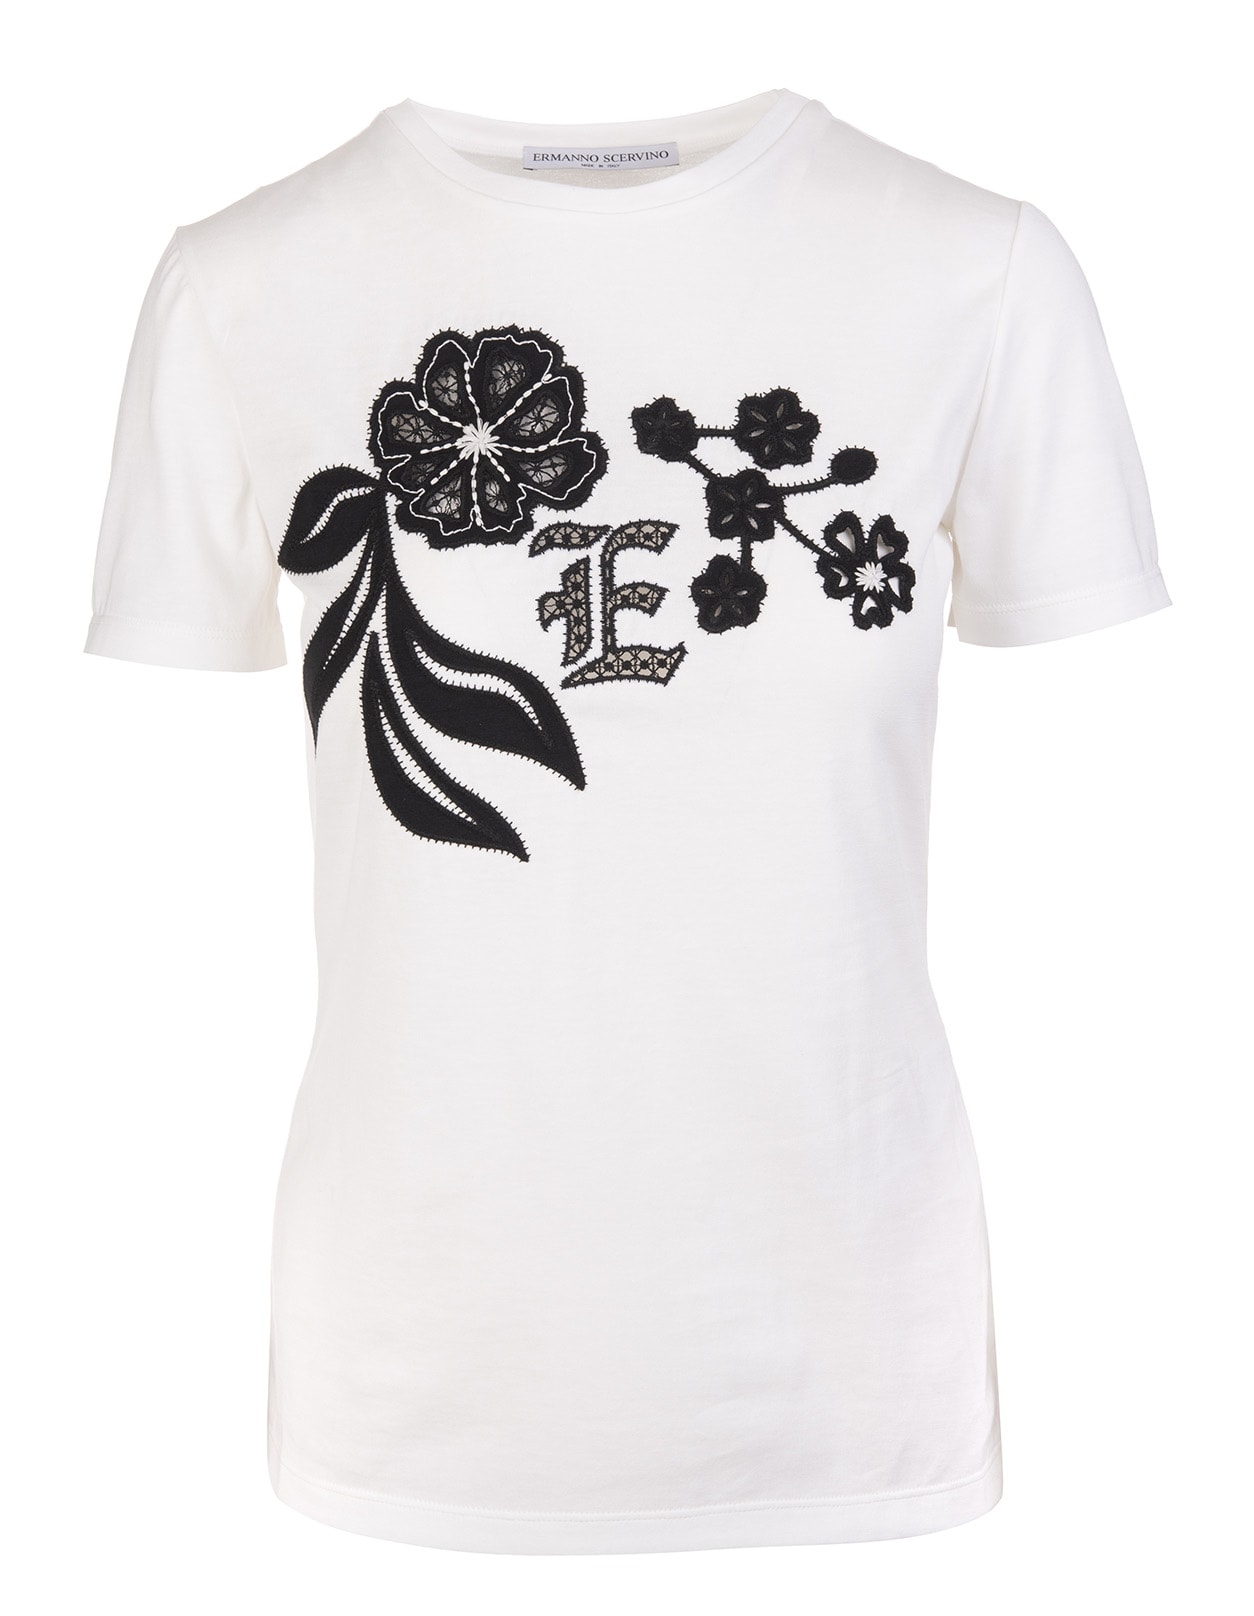 Ermanno Scervino White T-shirt With Embroidered Floral Inlays